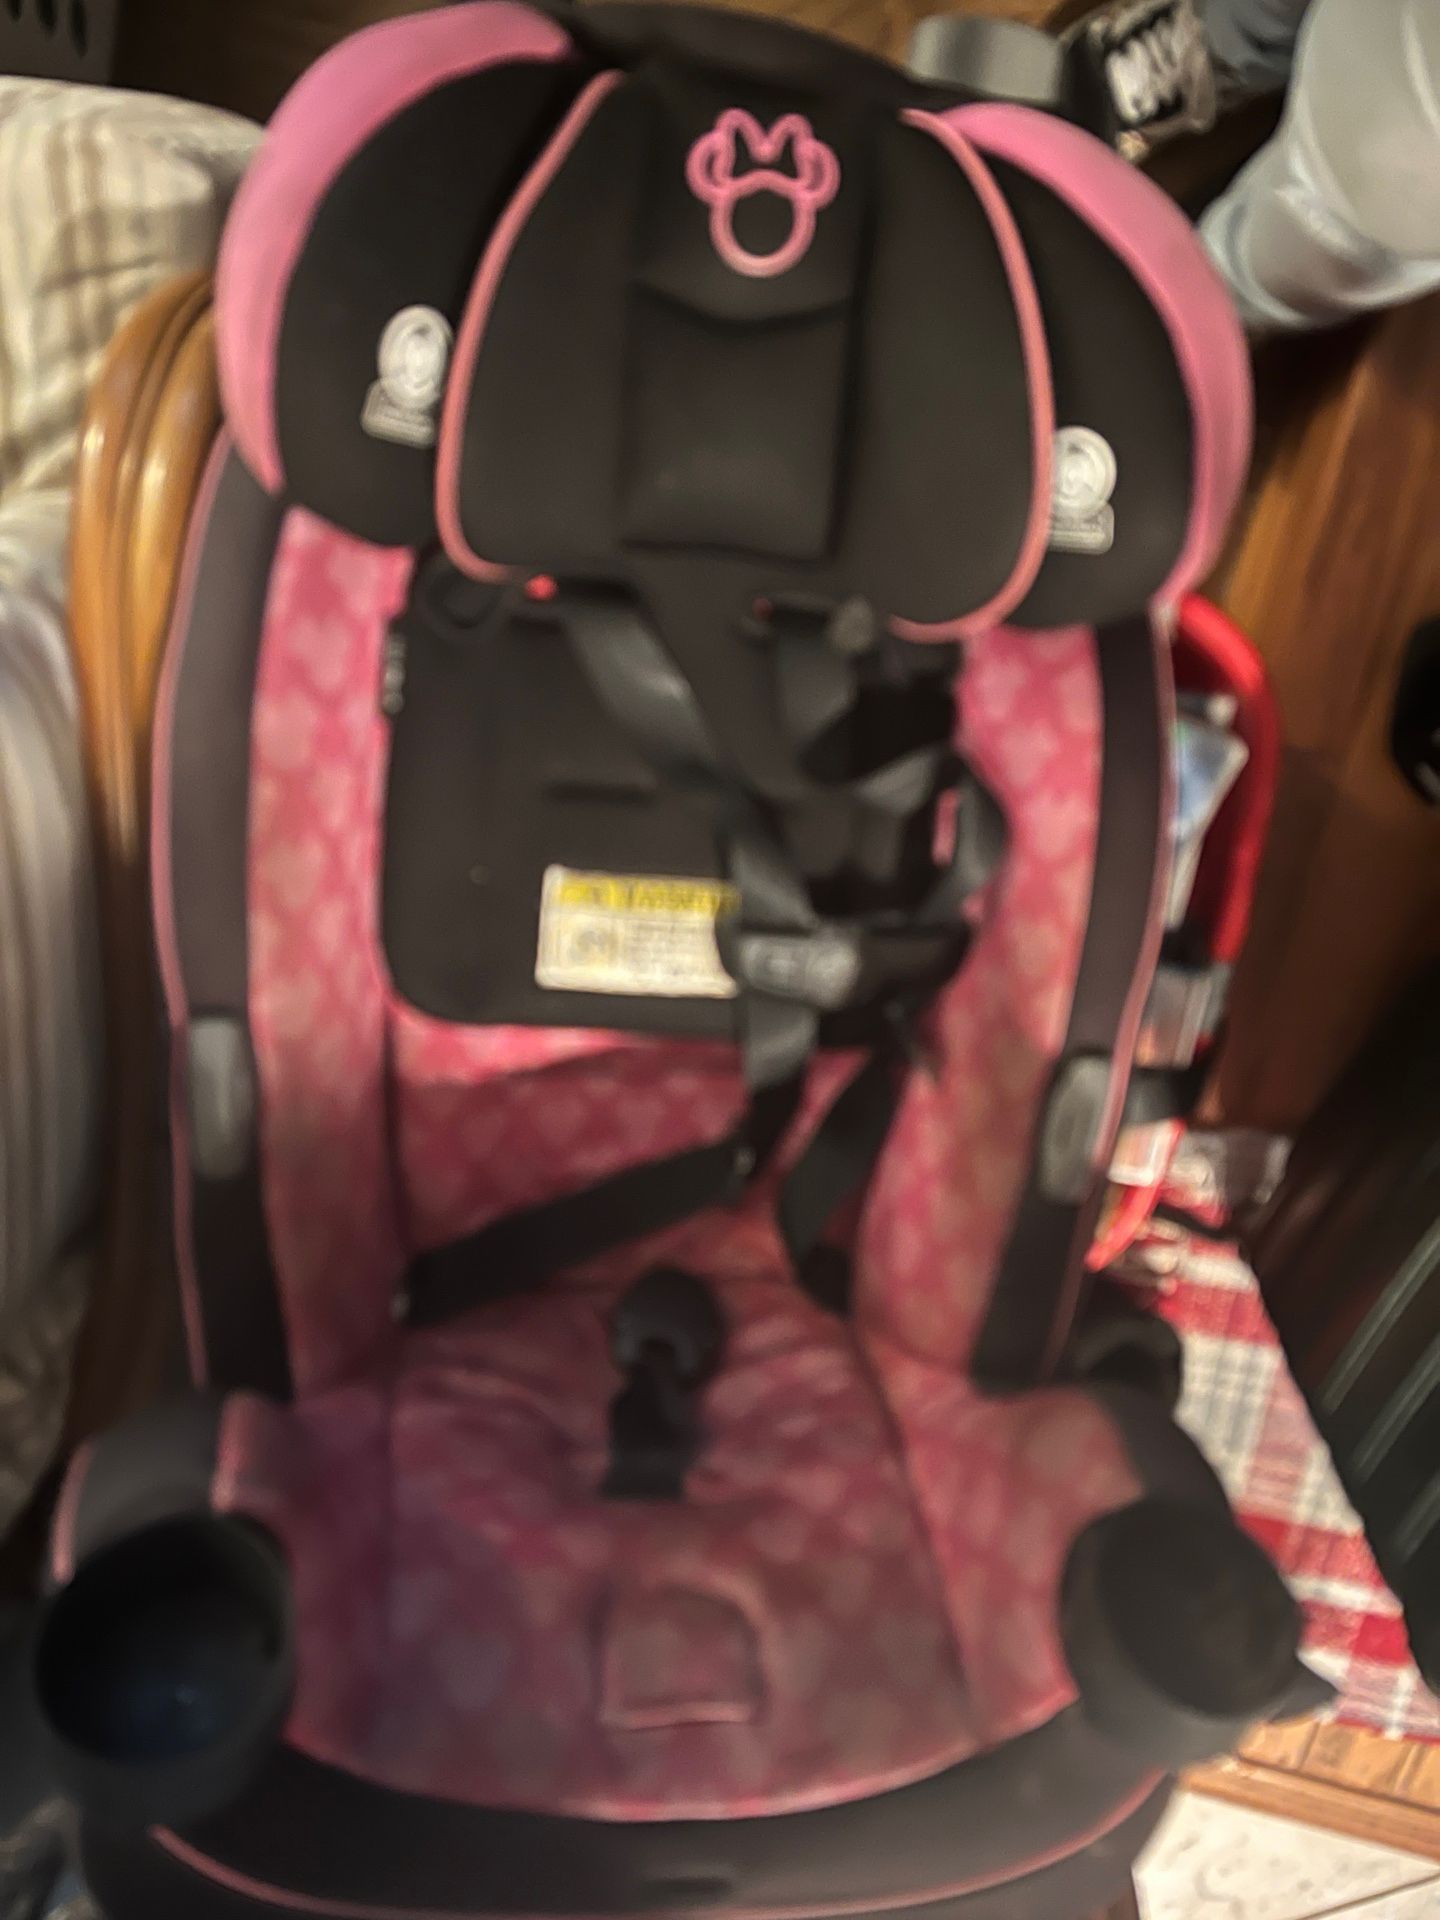 Disney Minnie Mouse Grow-and-go All in one car seat/booster Seat